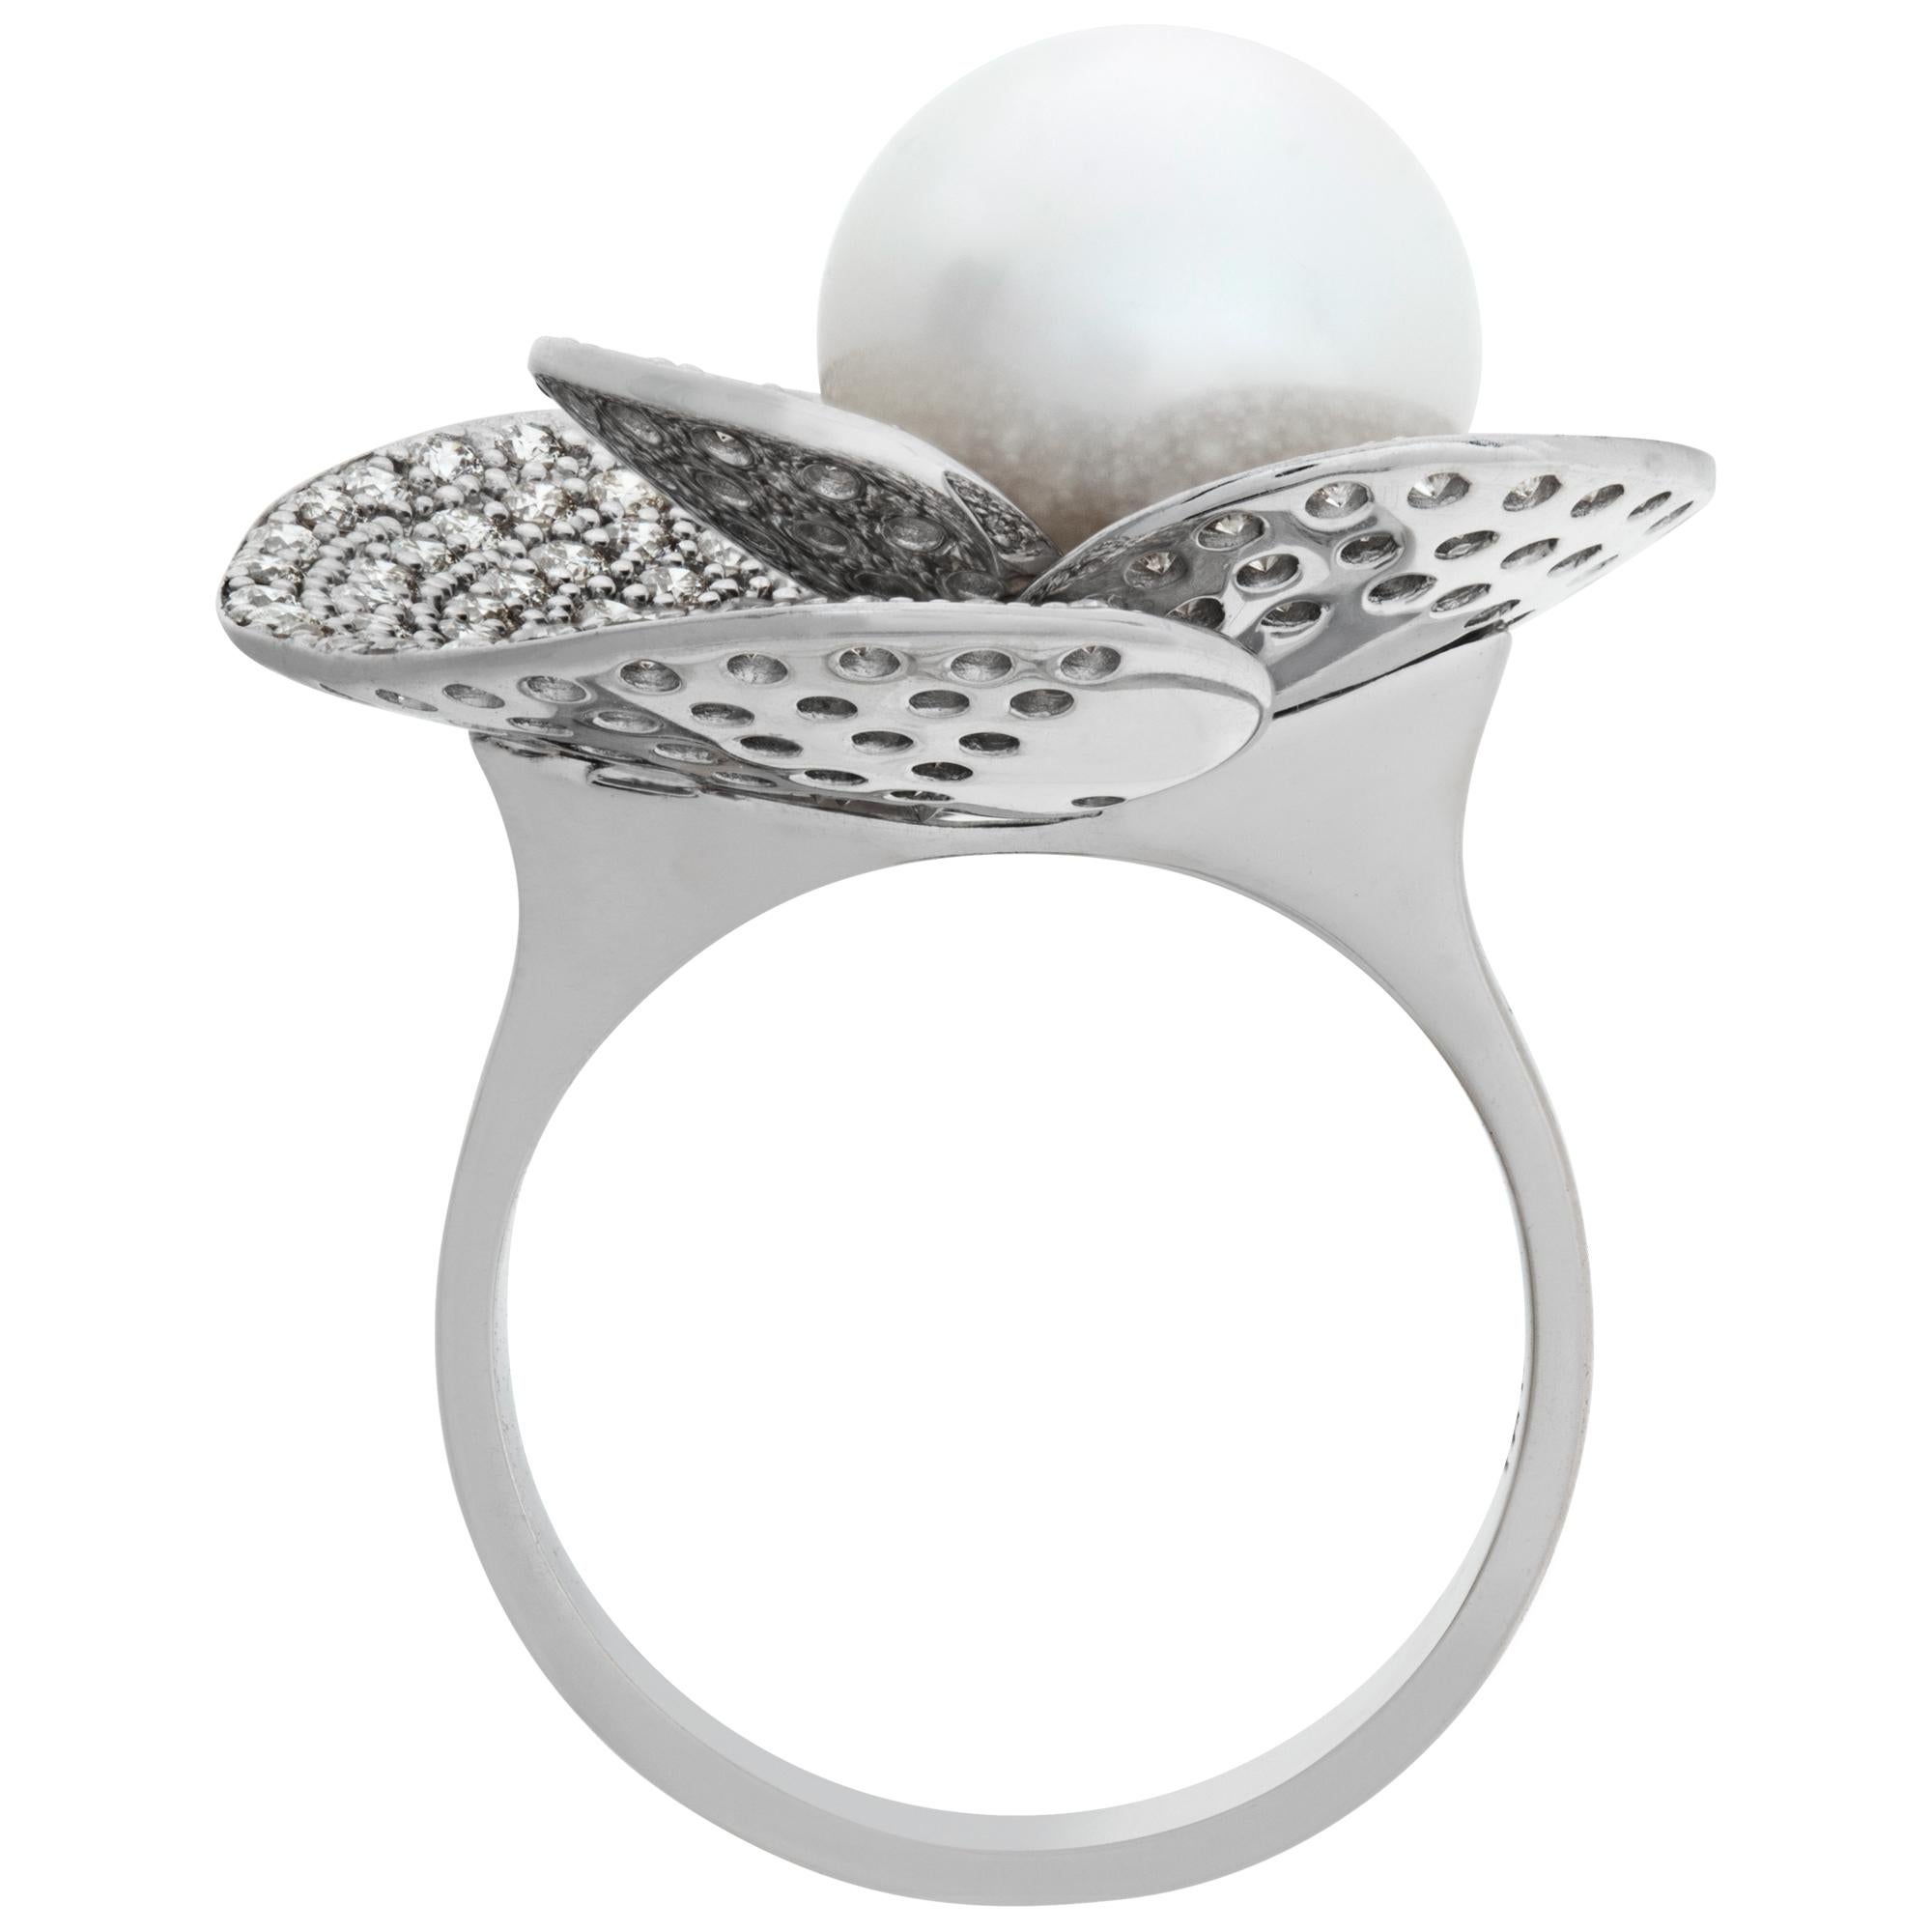 Women's White gold pave diamond petals ring cradling a 11.3 mm cultured pearl For Sale